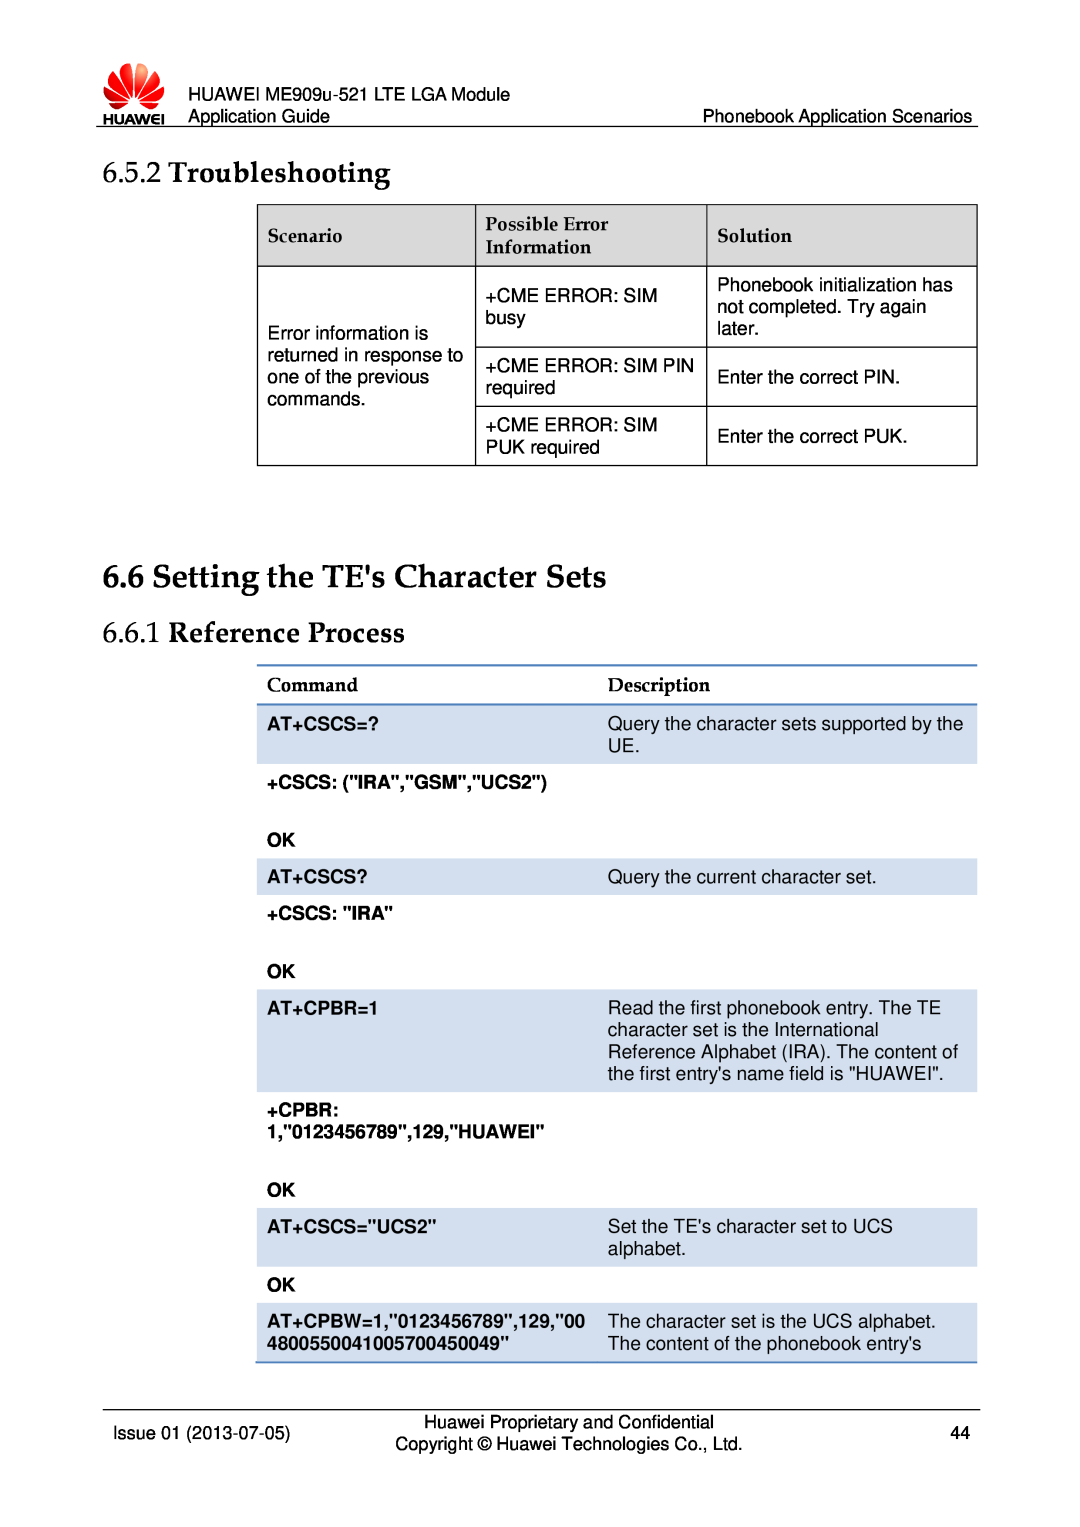 Huawei ME909u-521 manual Setting the TEs Character Sets, Troubleshooting, Reference Process 